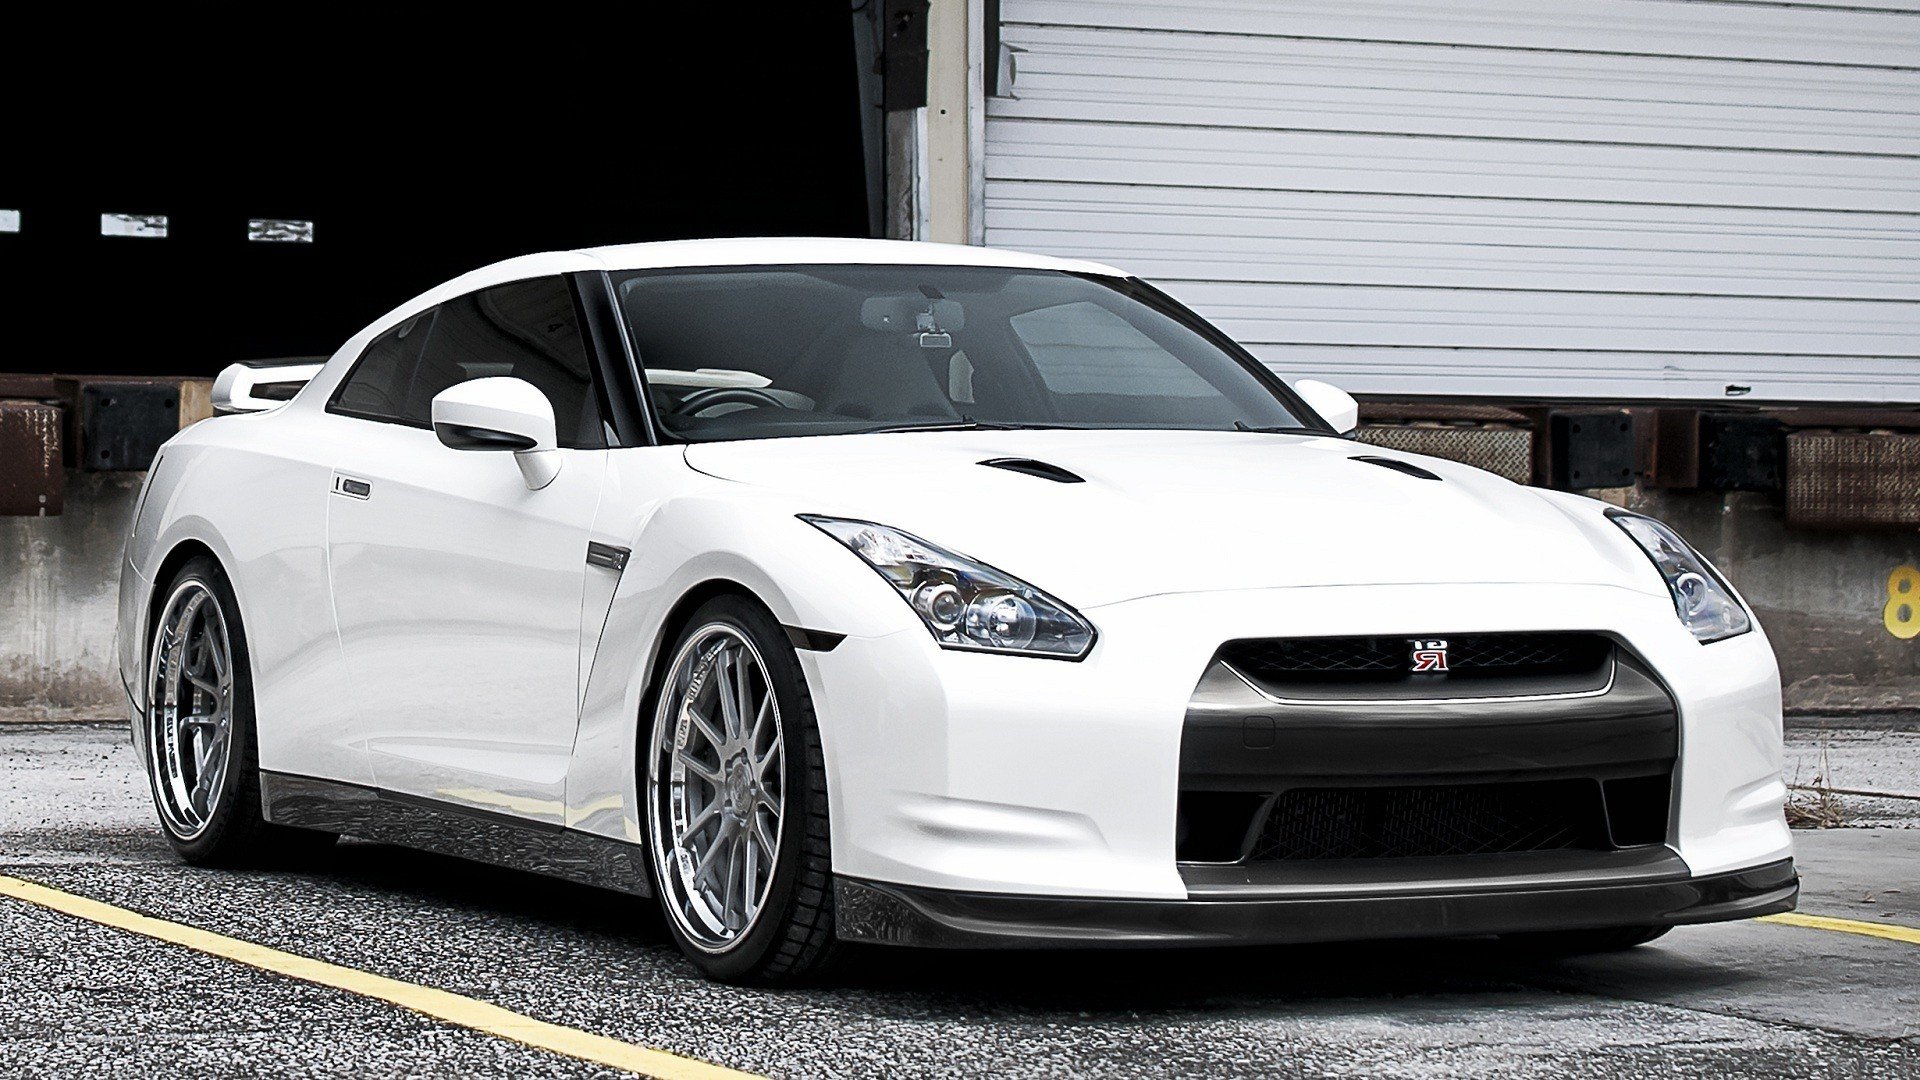 cars, Nissan, Vehicles, White, Cars, Jdm, Japanese, Domestic, Market, Nissan, Gt r, R35, Three, Sixty, Forged Wallpaper